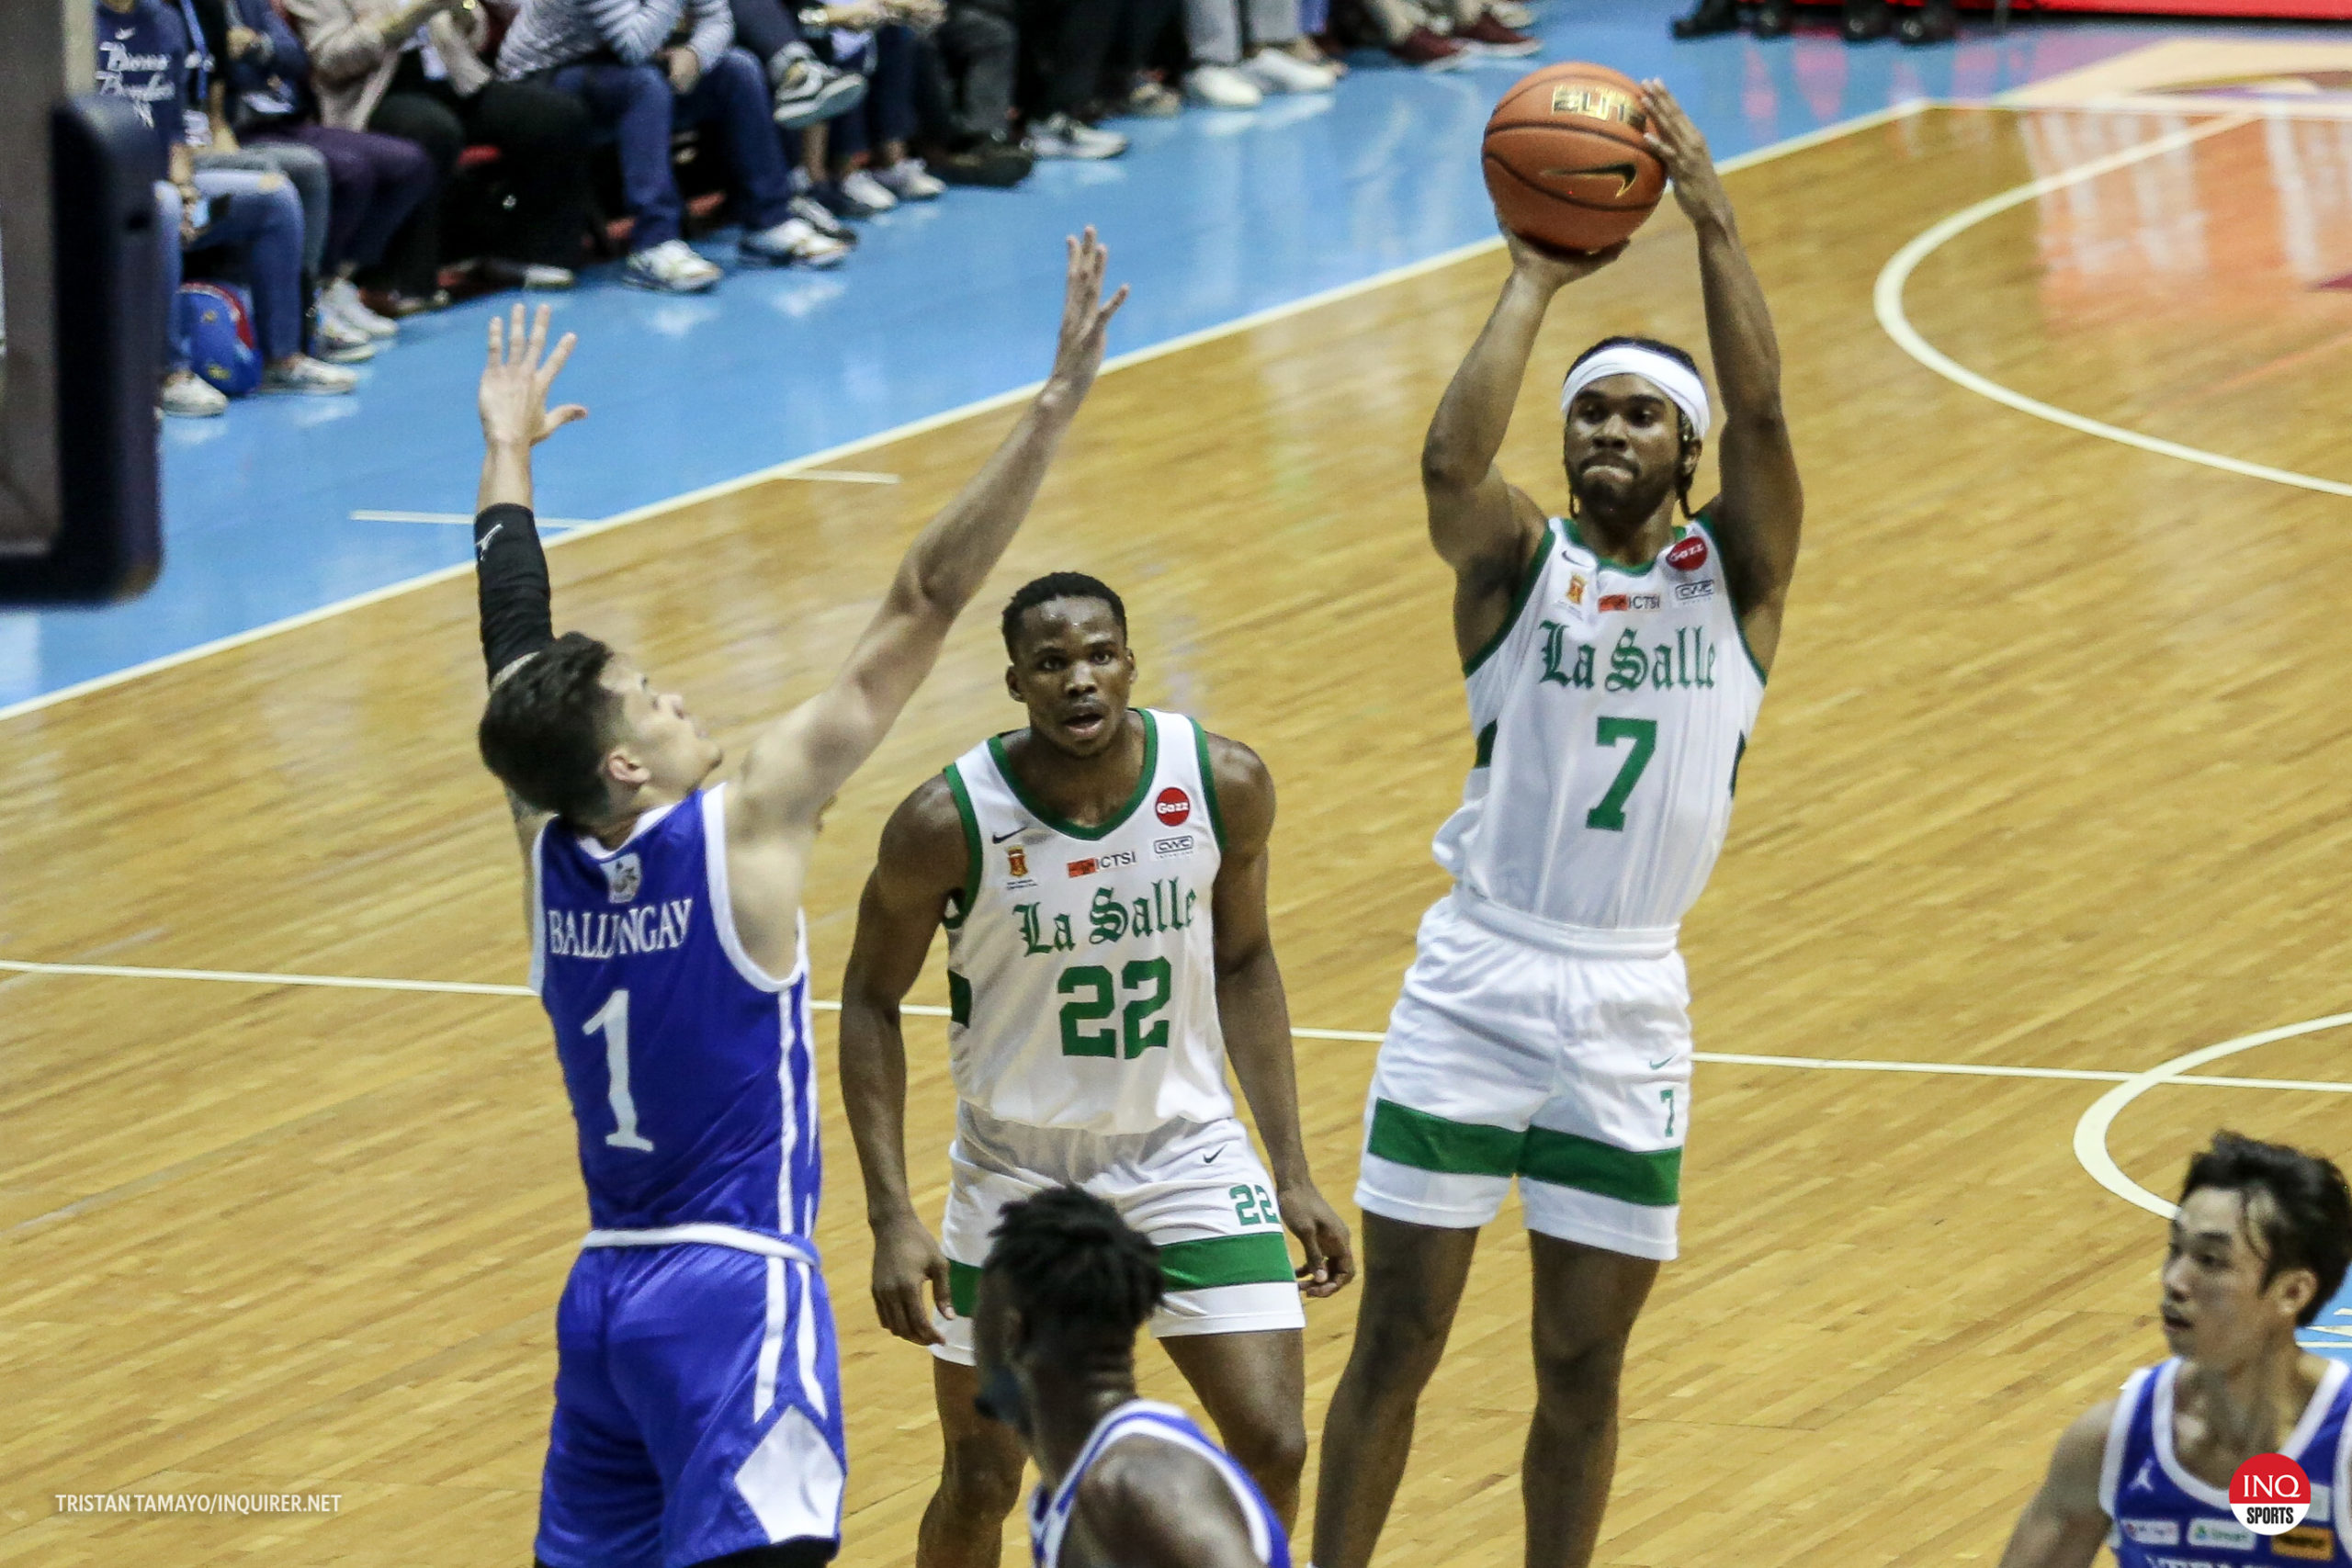 La Salle's Schonny Winston leads the Green Archers past Ateneo. Photo by Tristan Tamayo/INQUIRER.net